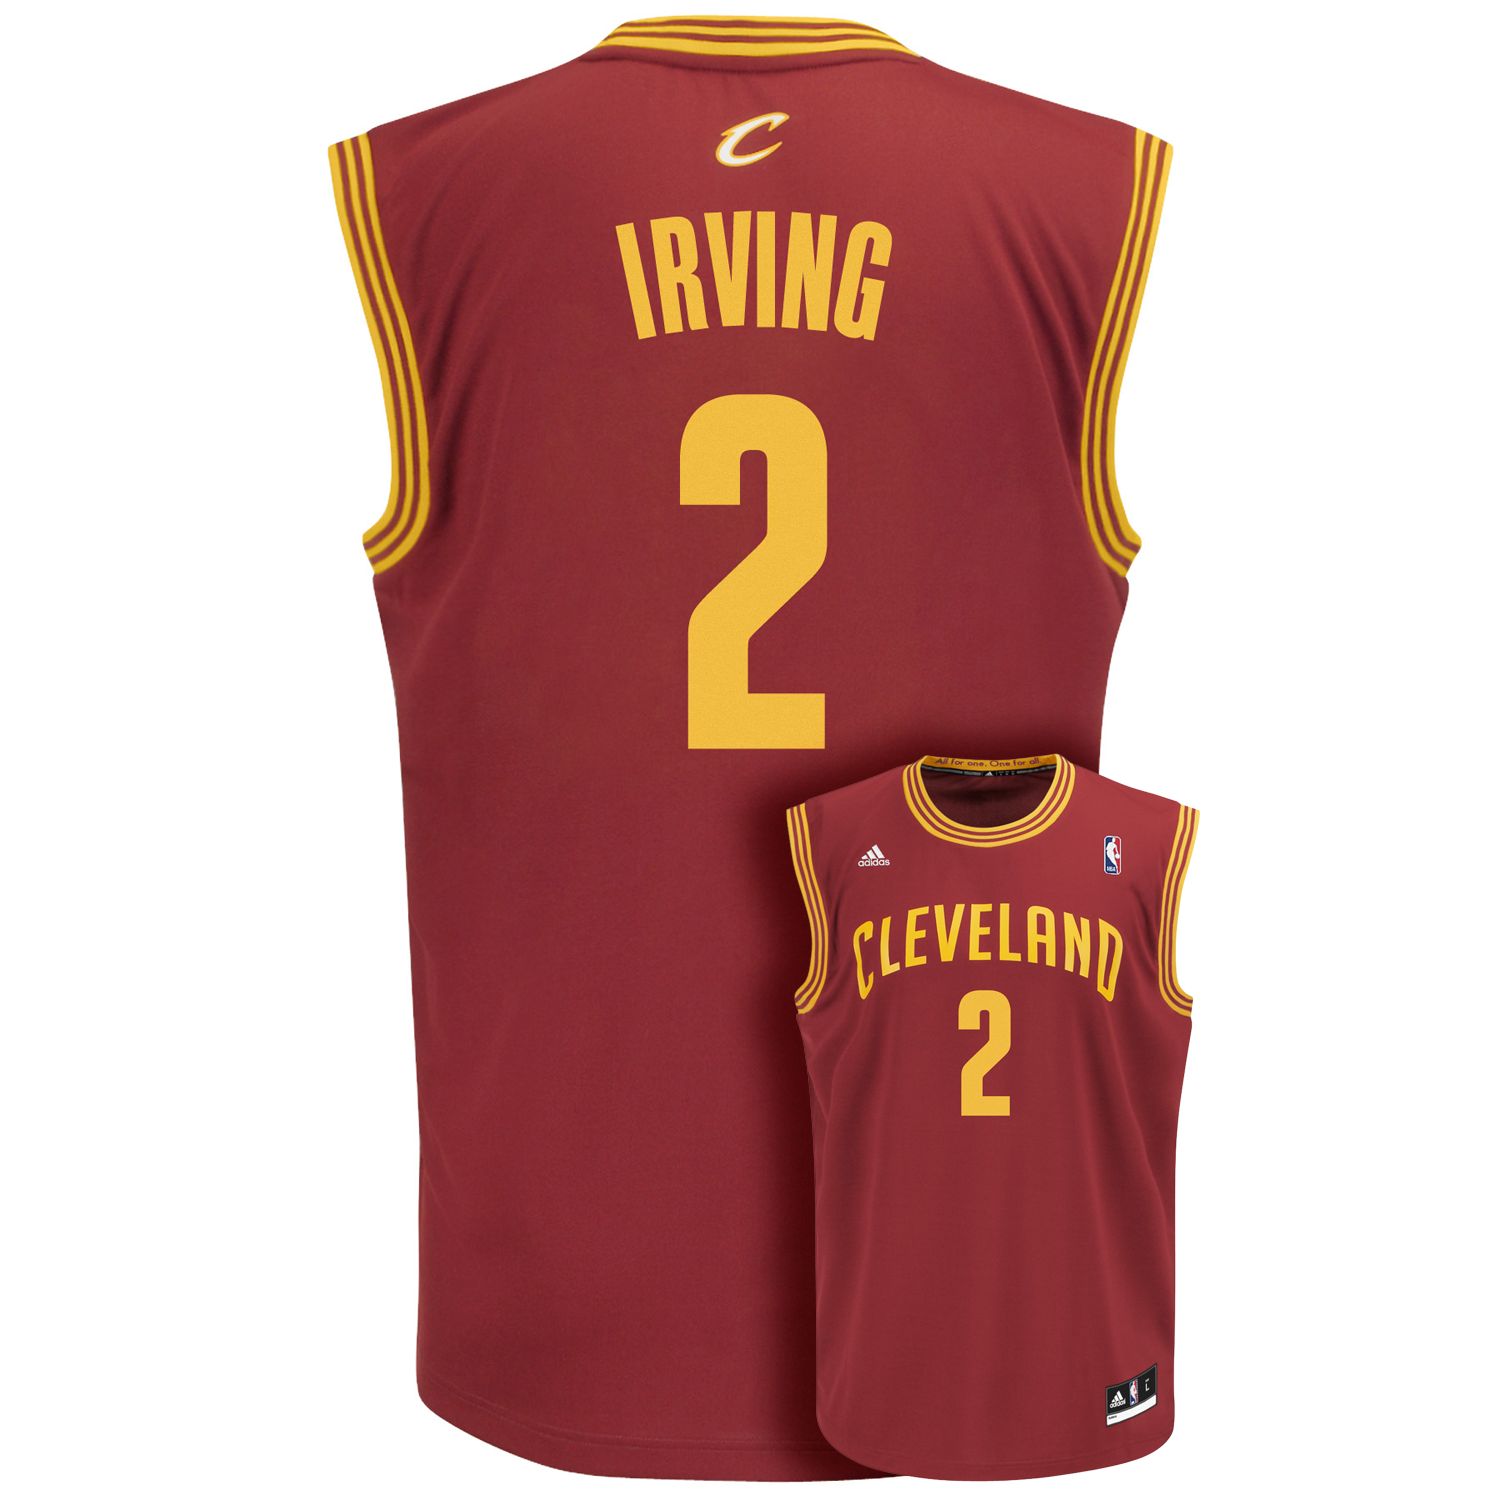 kyrie irving jersey numbers